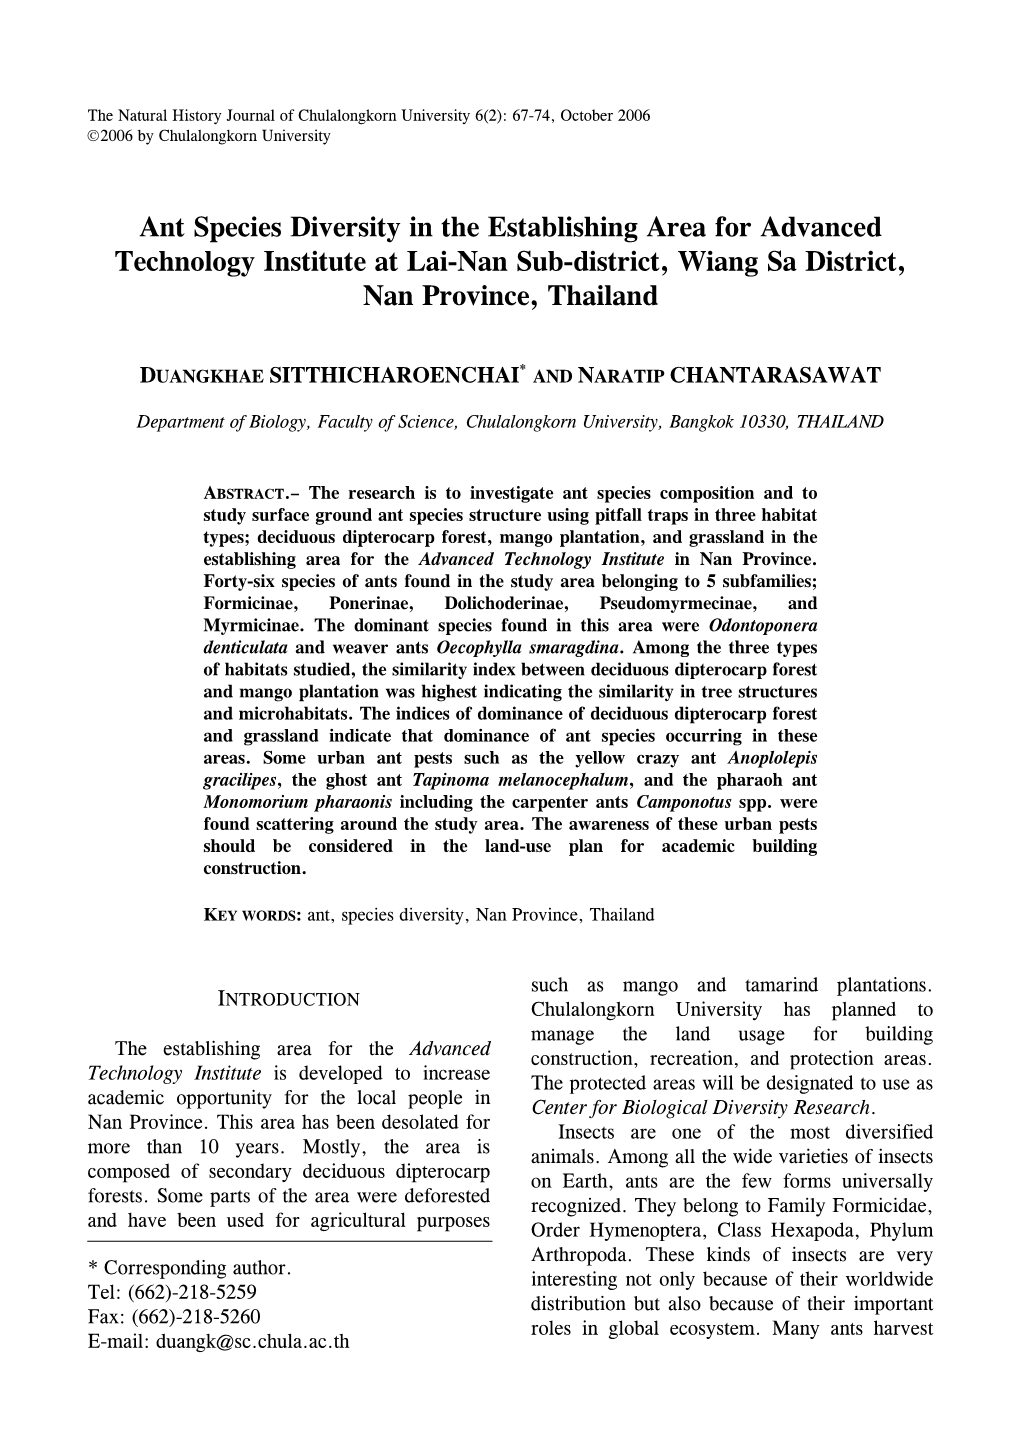 Ant Species Diversity in the Establishing Area for Advanced Technology Institute at Lai-Nan Sub-District, Wiang Sa District, Nan Province, Thailand